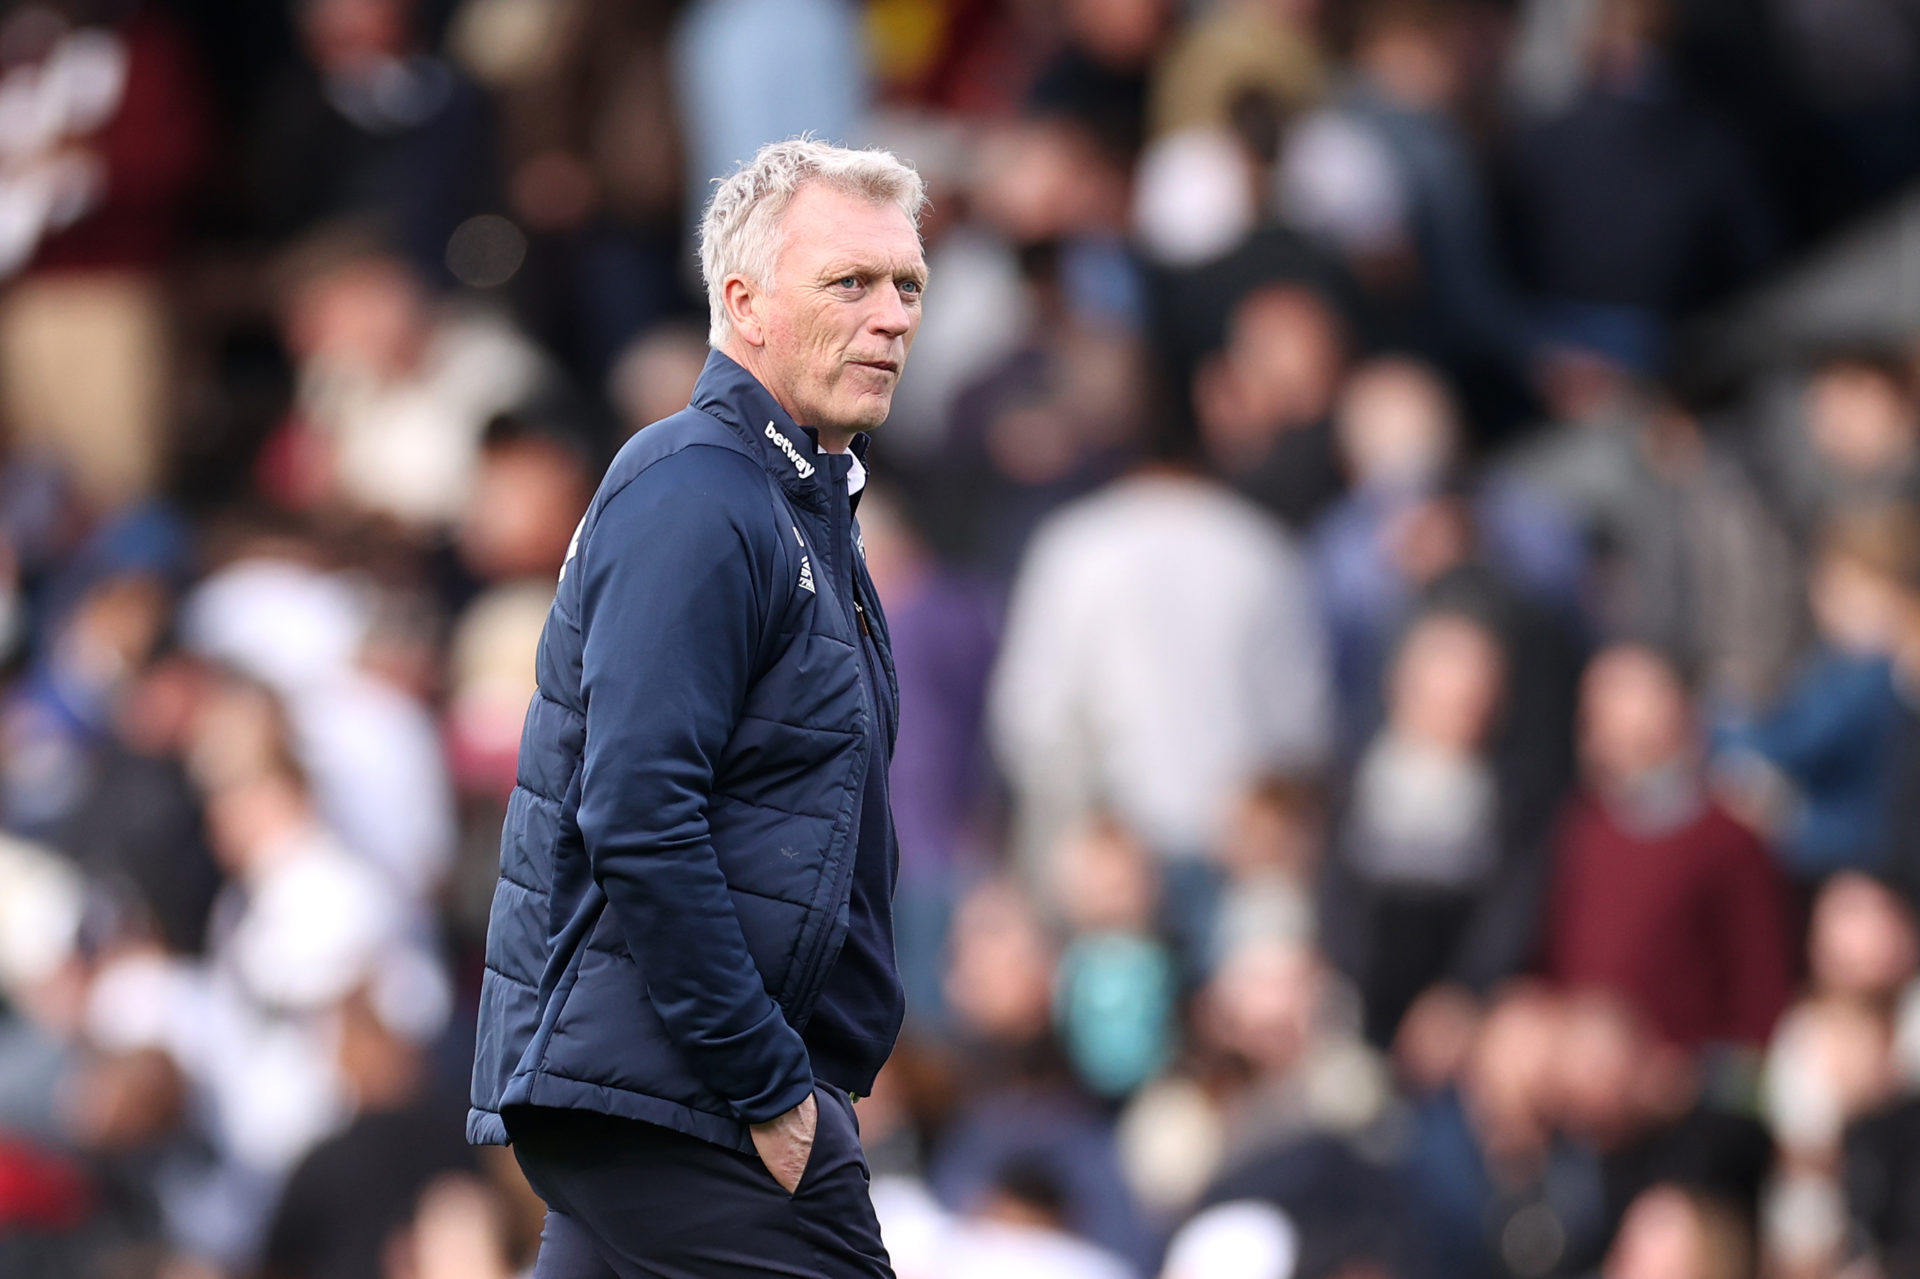 Picture: Moyes stared down West Ham fans after being berated at Fulham